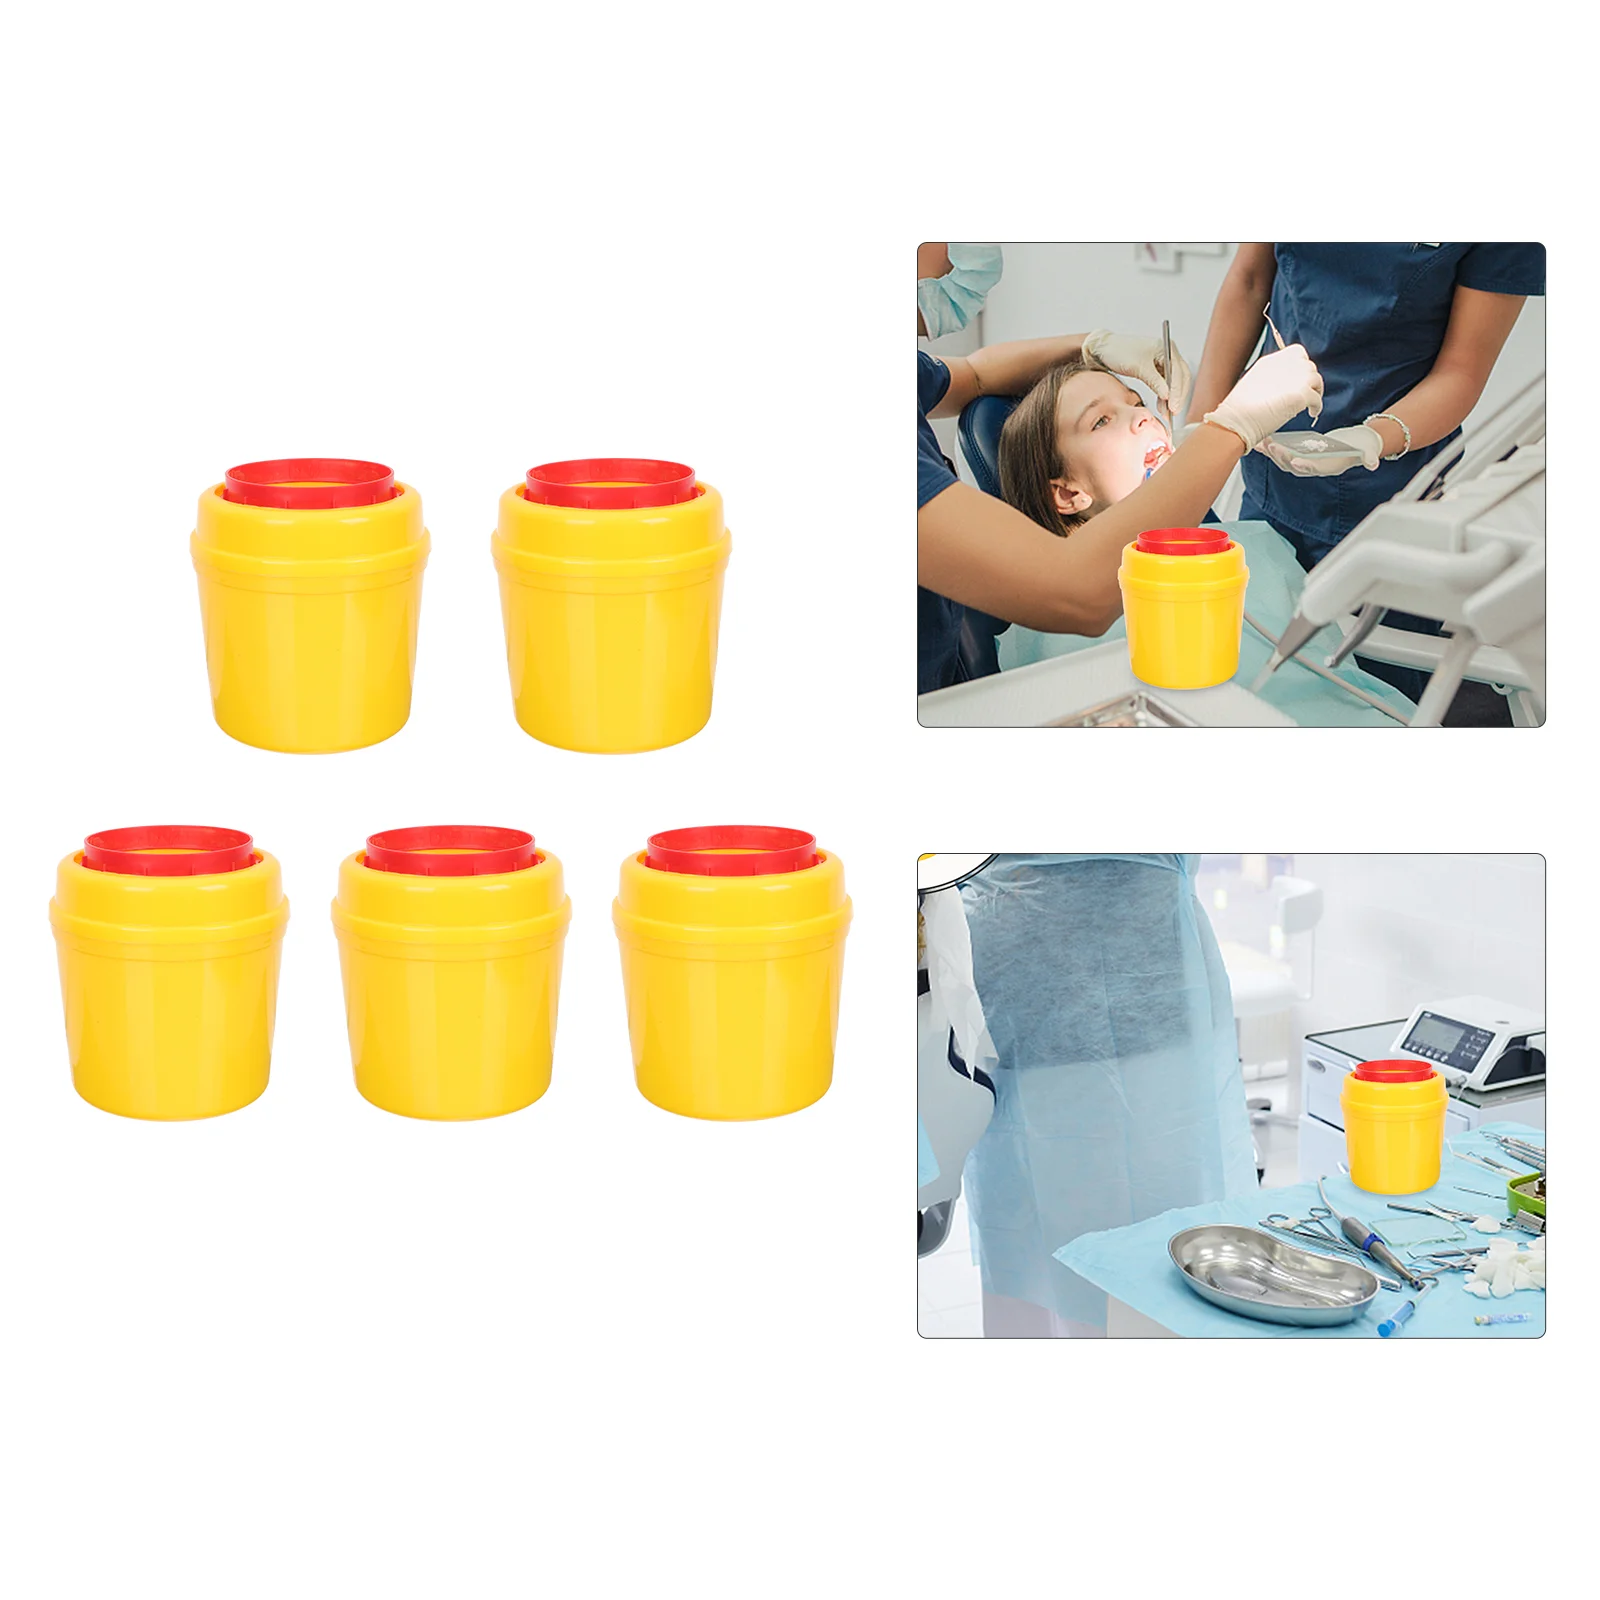 

5 Pcs Sharp Instruments Barrels Small Container Professional Sharps Containers Clinic Syringe Trash Cans Buckets Plastic